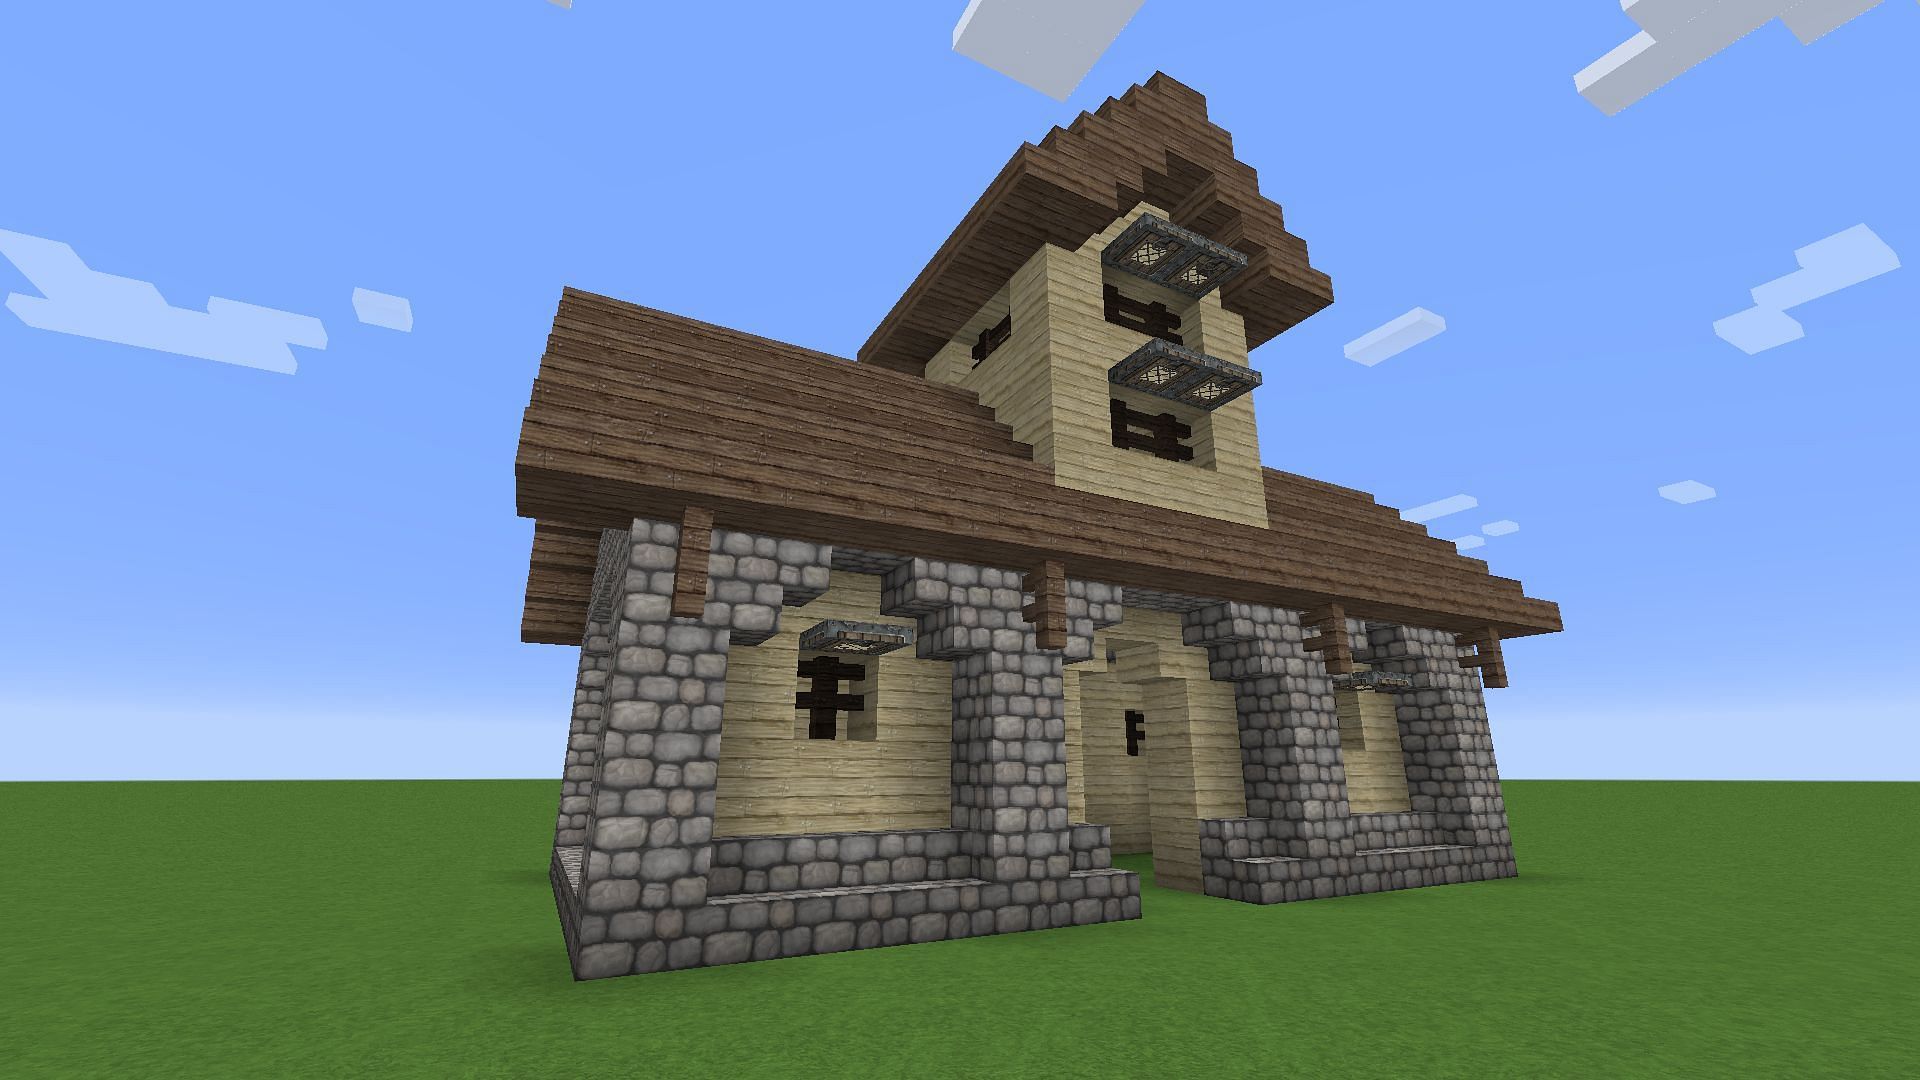 A barn design that emphasizes space reduction to fit in various town builds (Image via Blizky/Imgur)